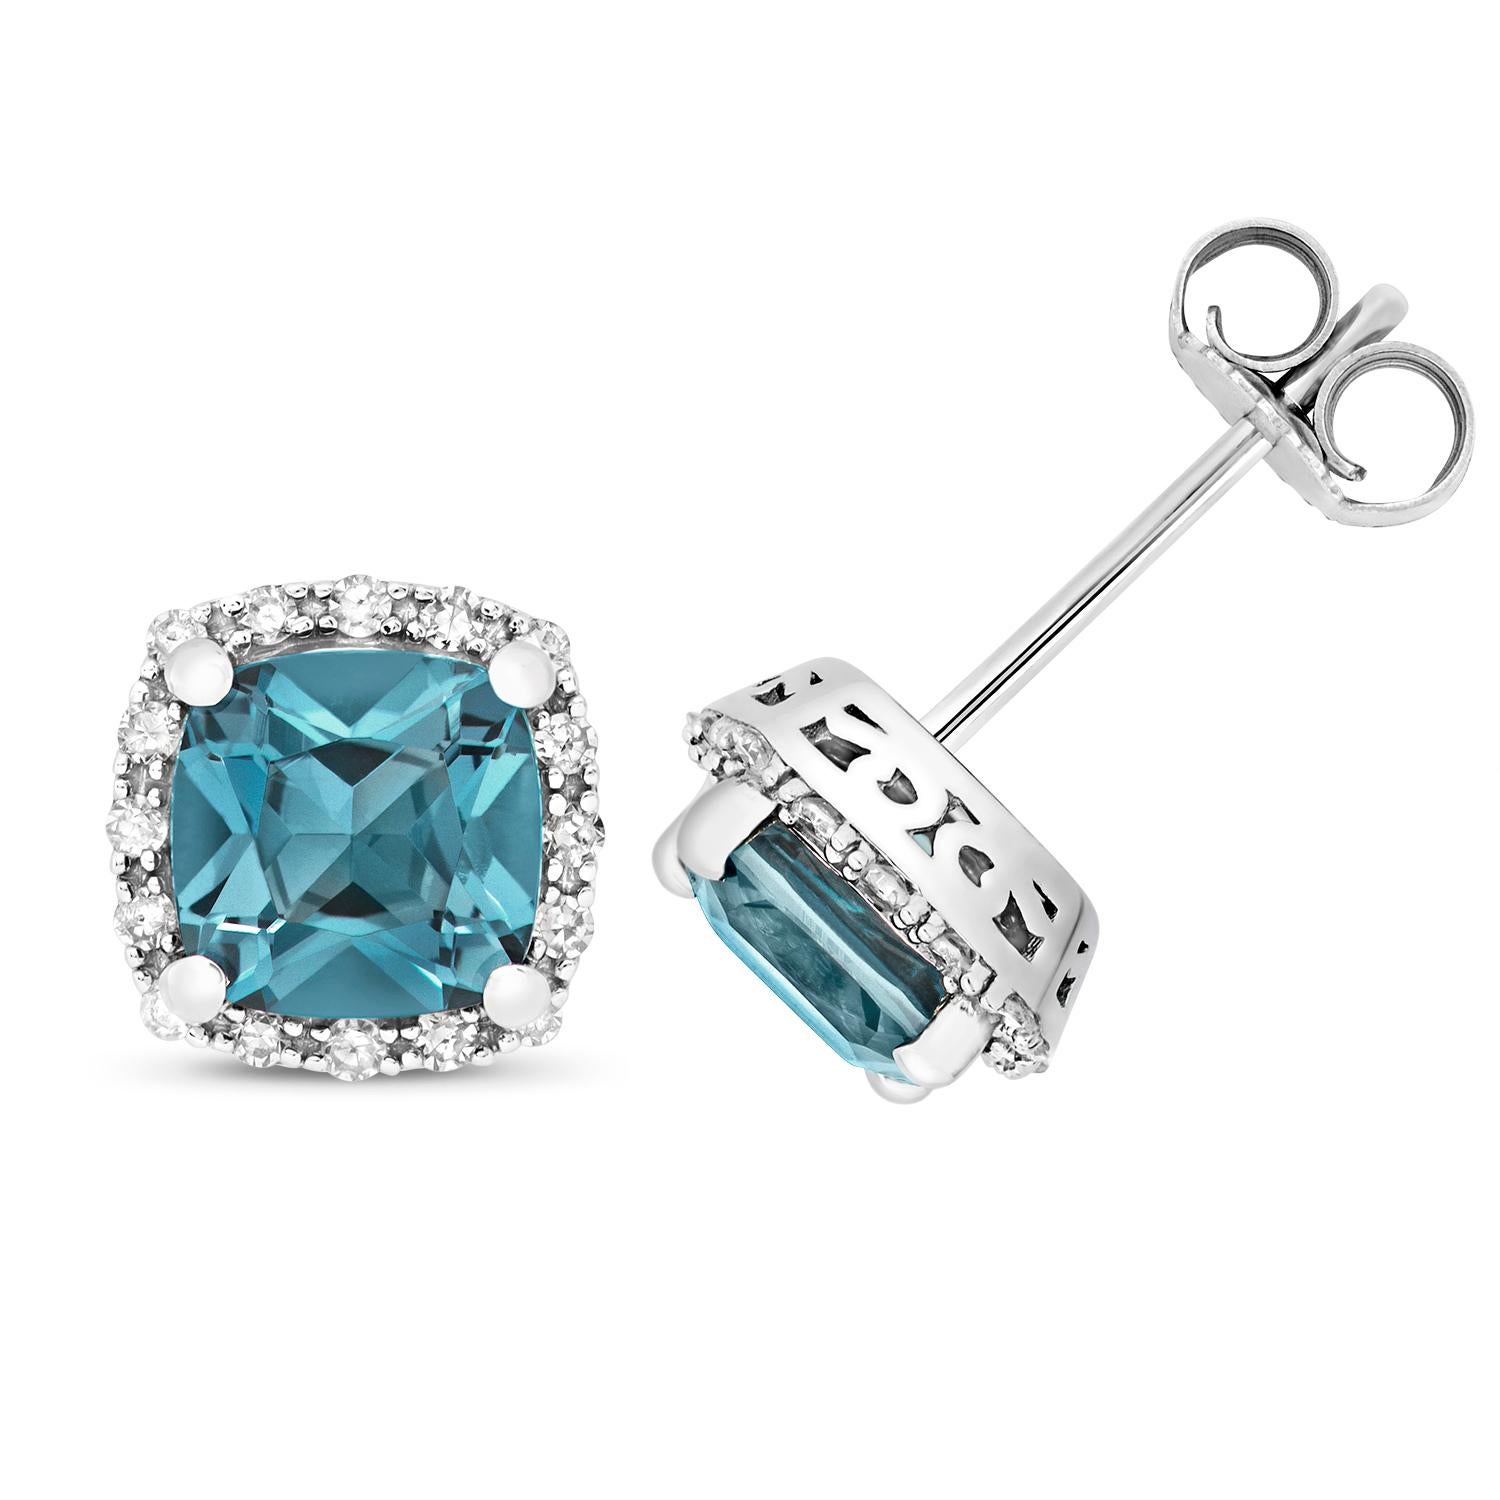 DIAMOND AND LONDON BLUE TOPAZ STUDS

9CT W/G 32SC/0.16CT 2LBT/6X6MM CU

Weight: 1.3g

Number Of Stones:2+32

Total Carates:2.420+0.160